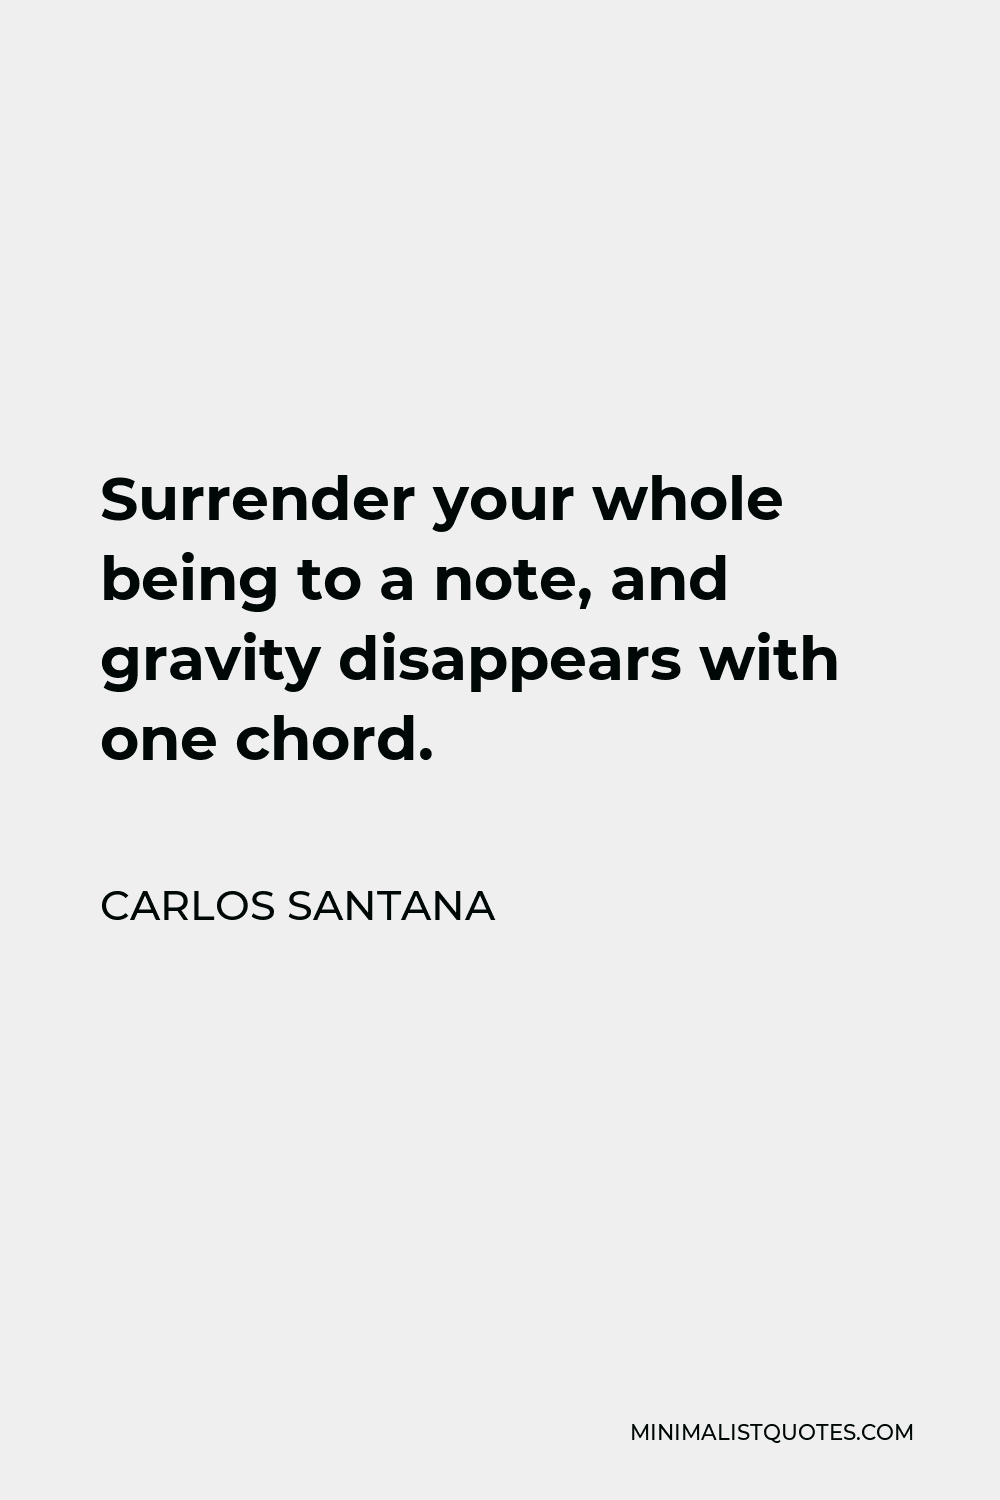 Carlos Santana Quote - Surrender your whole being to a note, and gravity disappears with one chord.